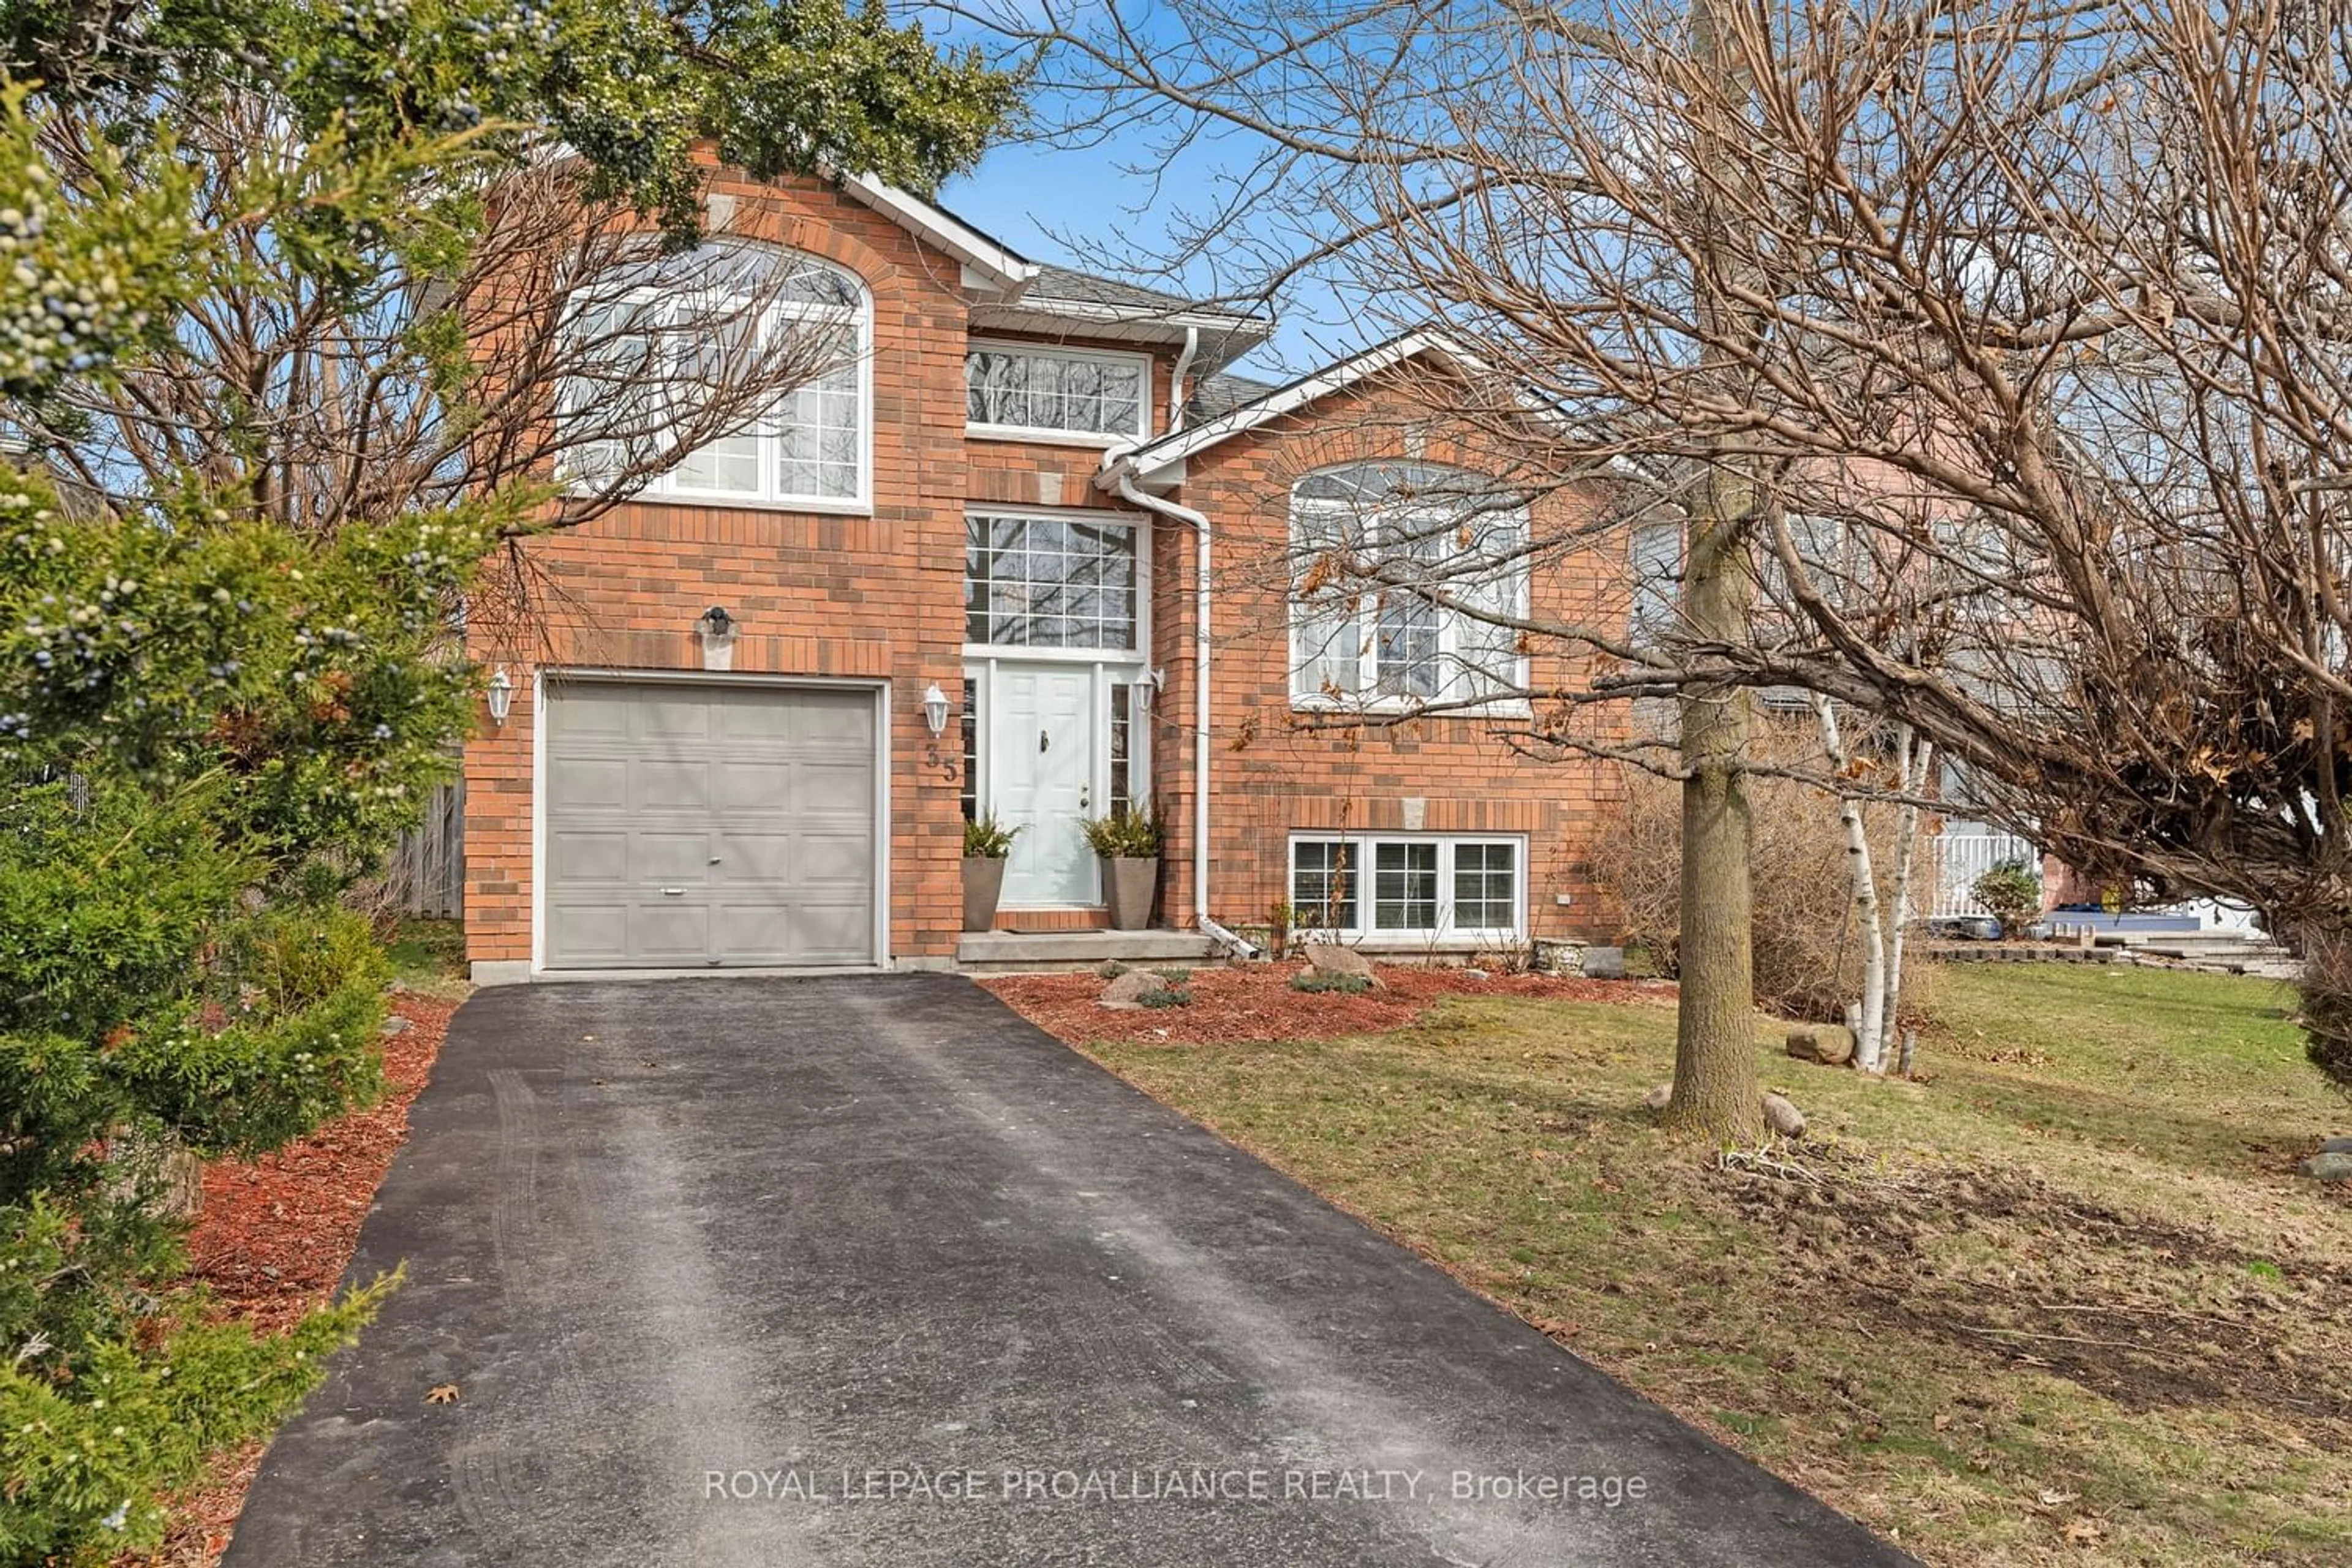 Home with brick exterior material for 35 Moira Lea Crt, Belleville Ontario K8N 4Z5